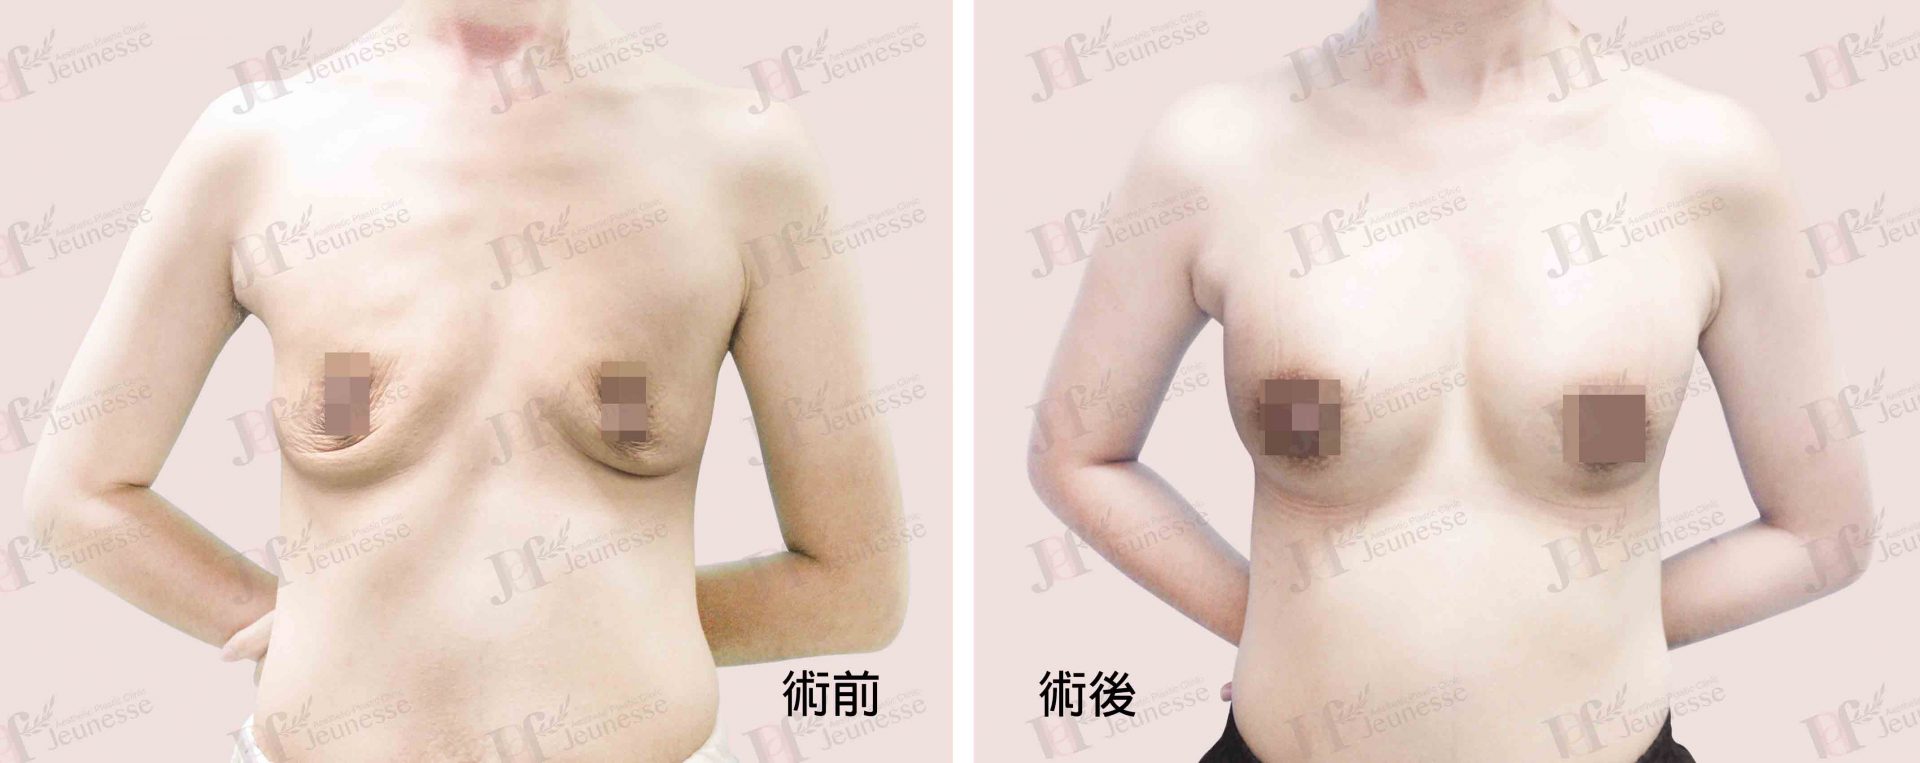 Breast Augmentation- Silicone implants -case2 正面-浮水印